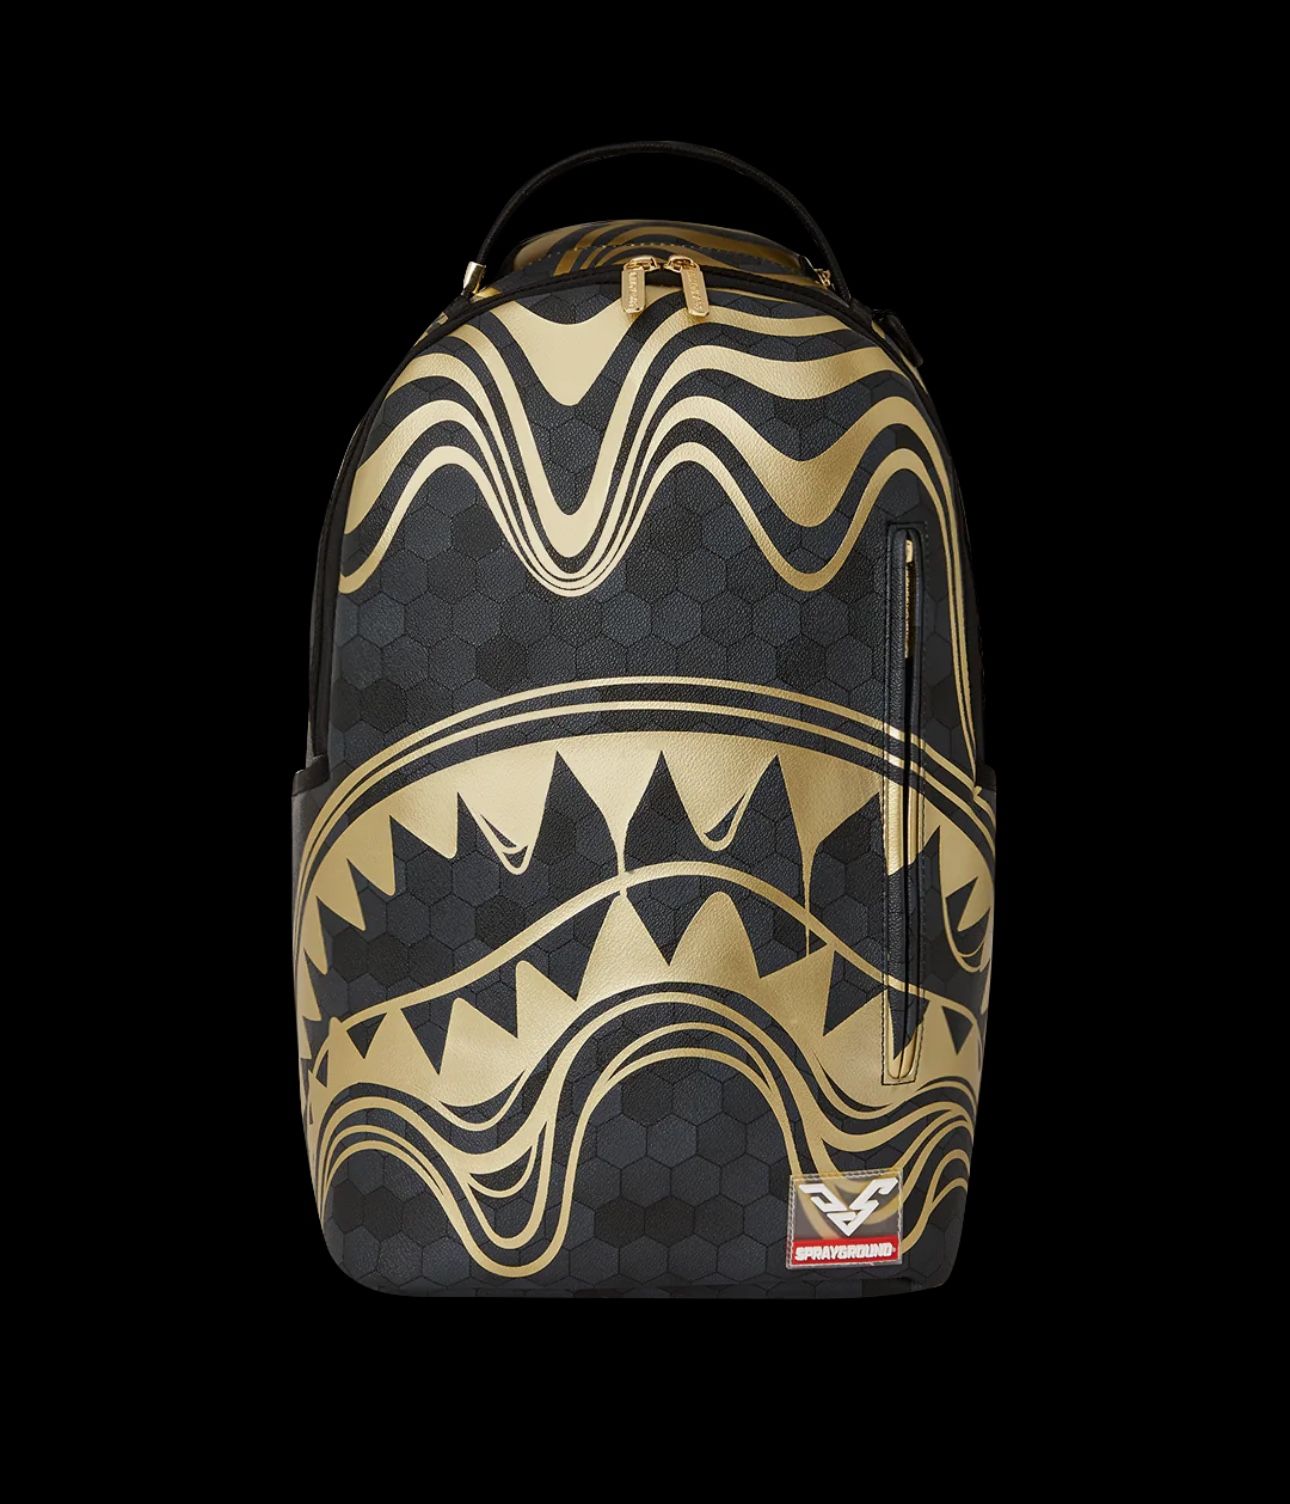 HONEYCOMB DEVONTA SMITH COLLAB BACKPACK